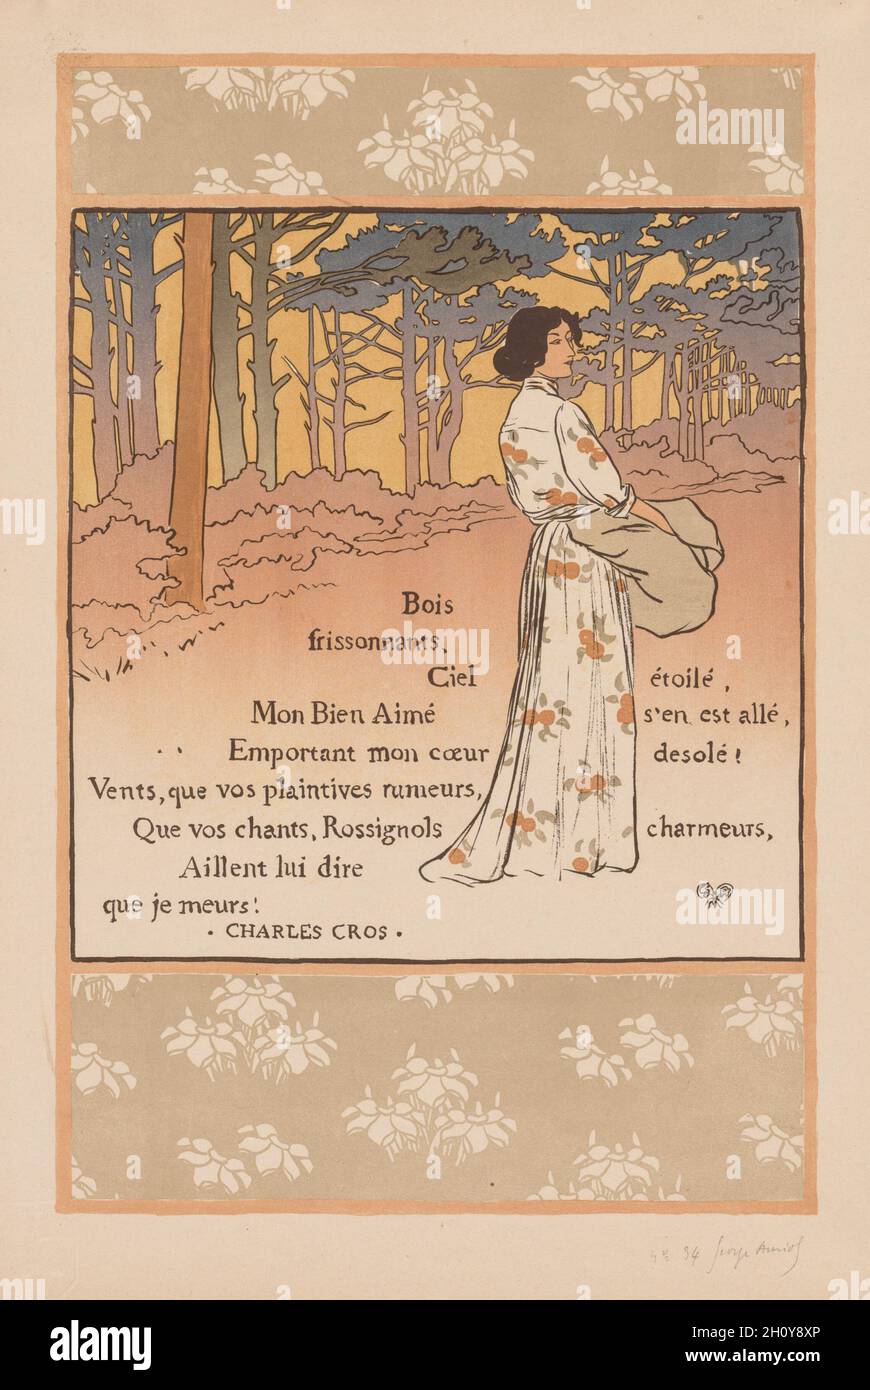 Trembling Woods, 1893. George Auriol (French, 1863-1938), L'Estampe originale, Album II. Lithograph, printed in color; sheet: 58.4 x 32.5 cm (23 x 12 13/16 in.); image: 49.7 x 32.5 cm (19 9/16 x 12 13/16 in.).  The coloration of the trees in the background, where the tone modulates from dark in the foliage to lighter and lighter in the trunks, was achieved with a technique borrowed from Japanese color woodcuts. The art of Japan is also apparent in the monochrome flower pattern above and below the image that imitates the silk scrolls on which paintings are hung. The poem, by Charles Cros, can b Stock Photo